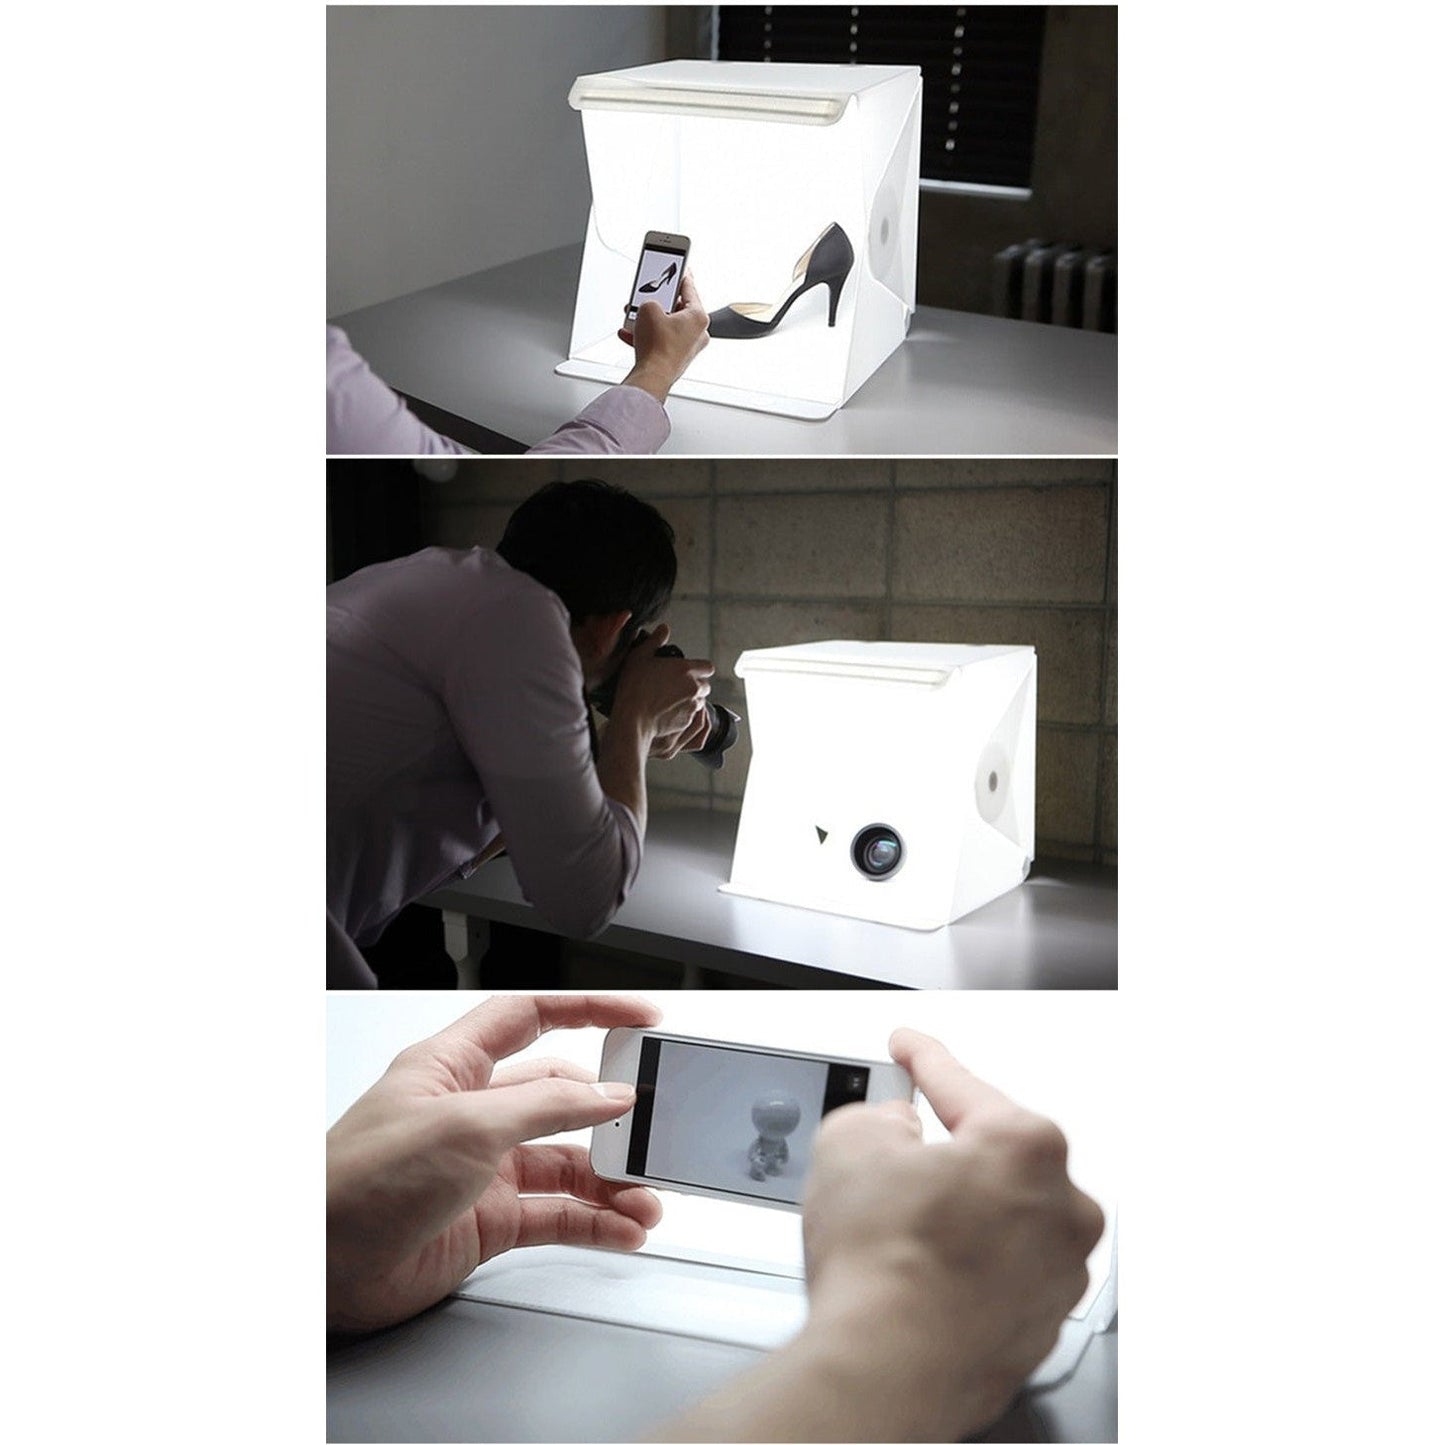 Folding Portable Photo Studio LED Light Soft Box- Take Pictures Like a Pro on the Go with a Smartphone or DSLR Camera